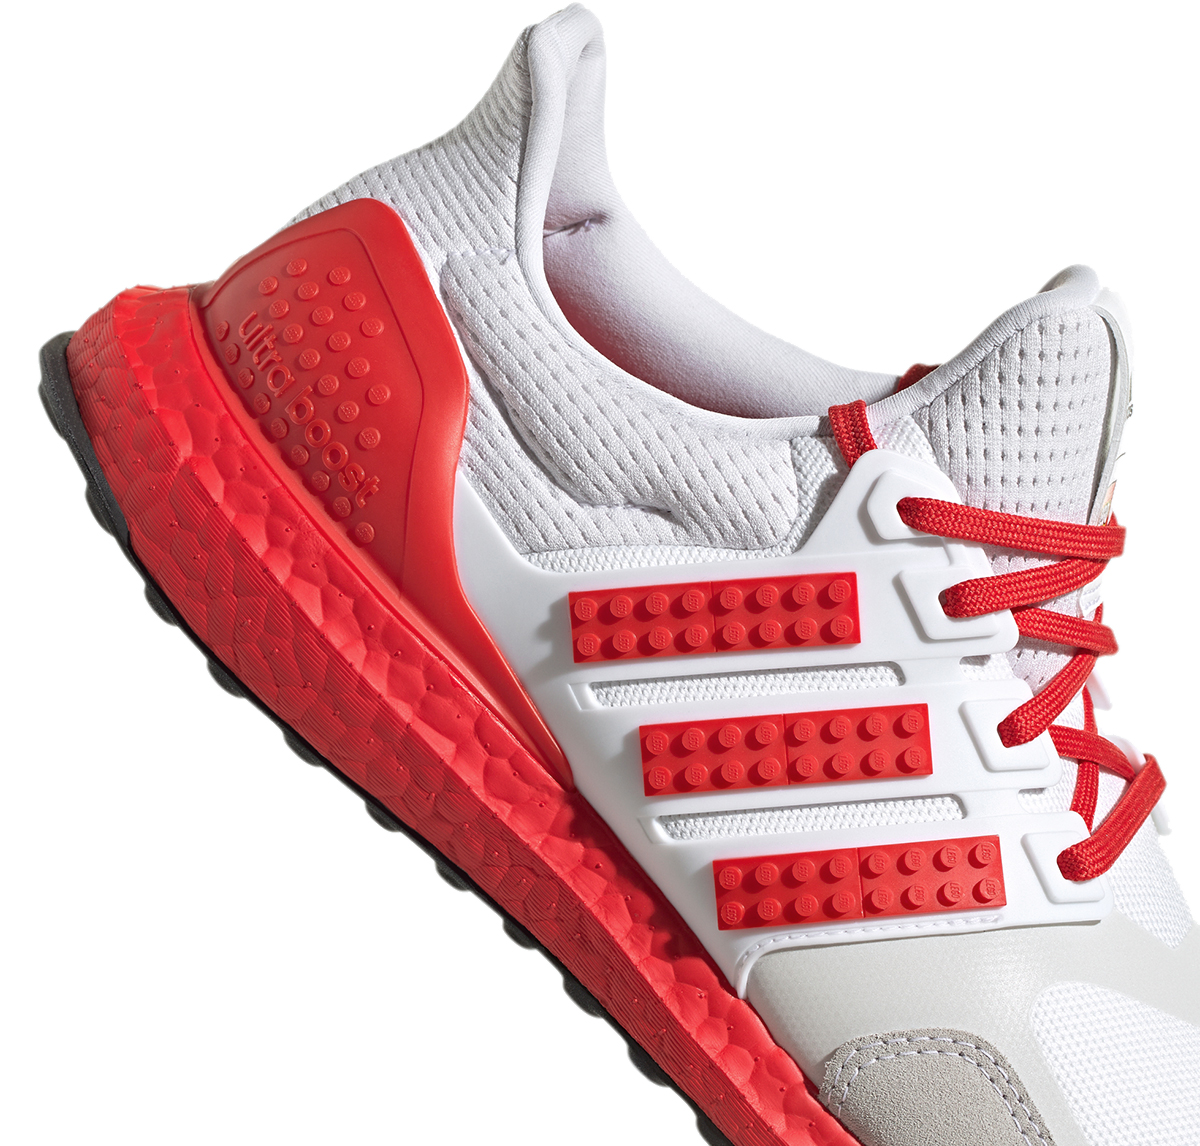 adidas Ultraboost DNA - LEGO - White Red